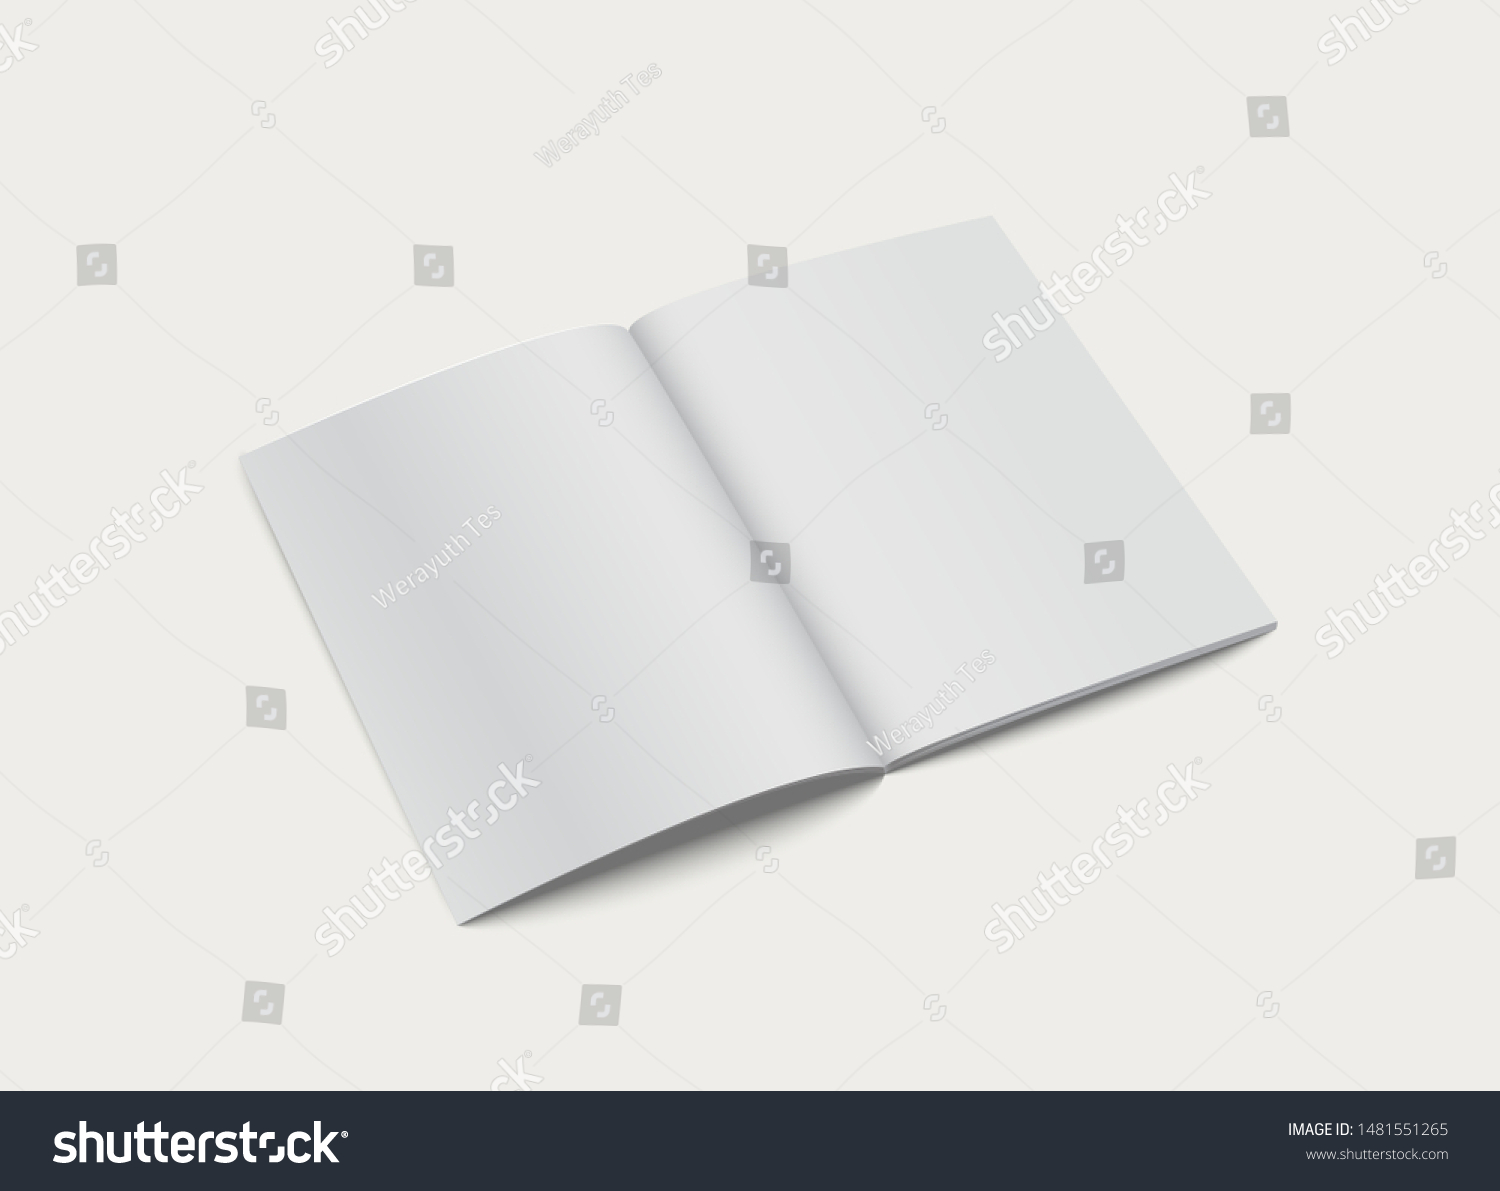 Blank Realistic Book Open Template Mockup Stock Vector (Royalty Free